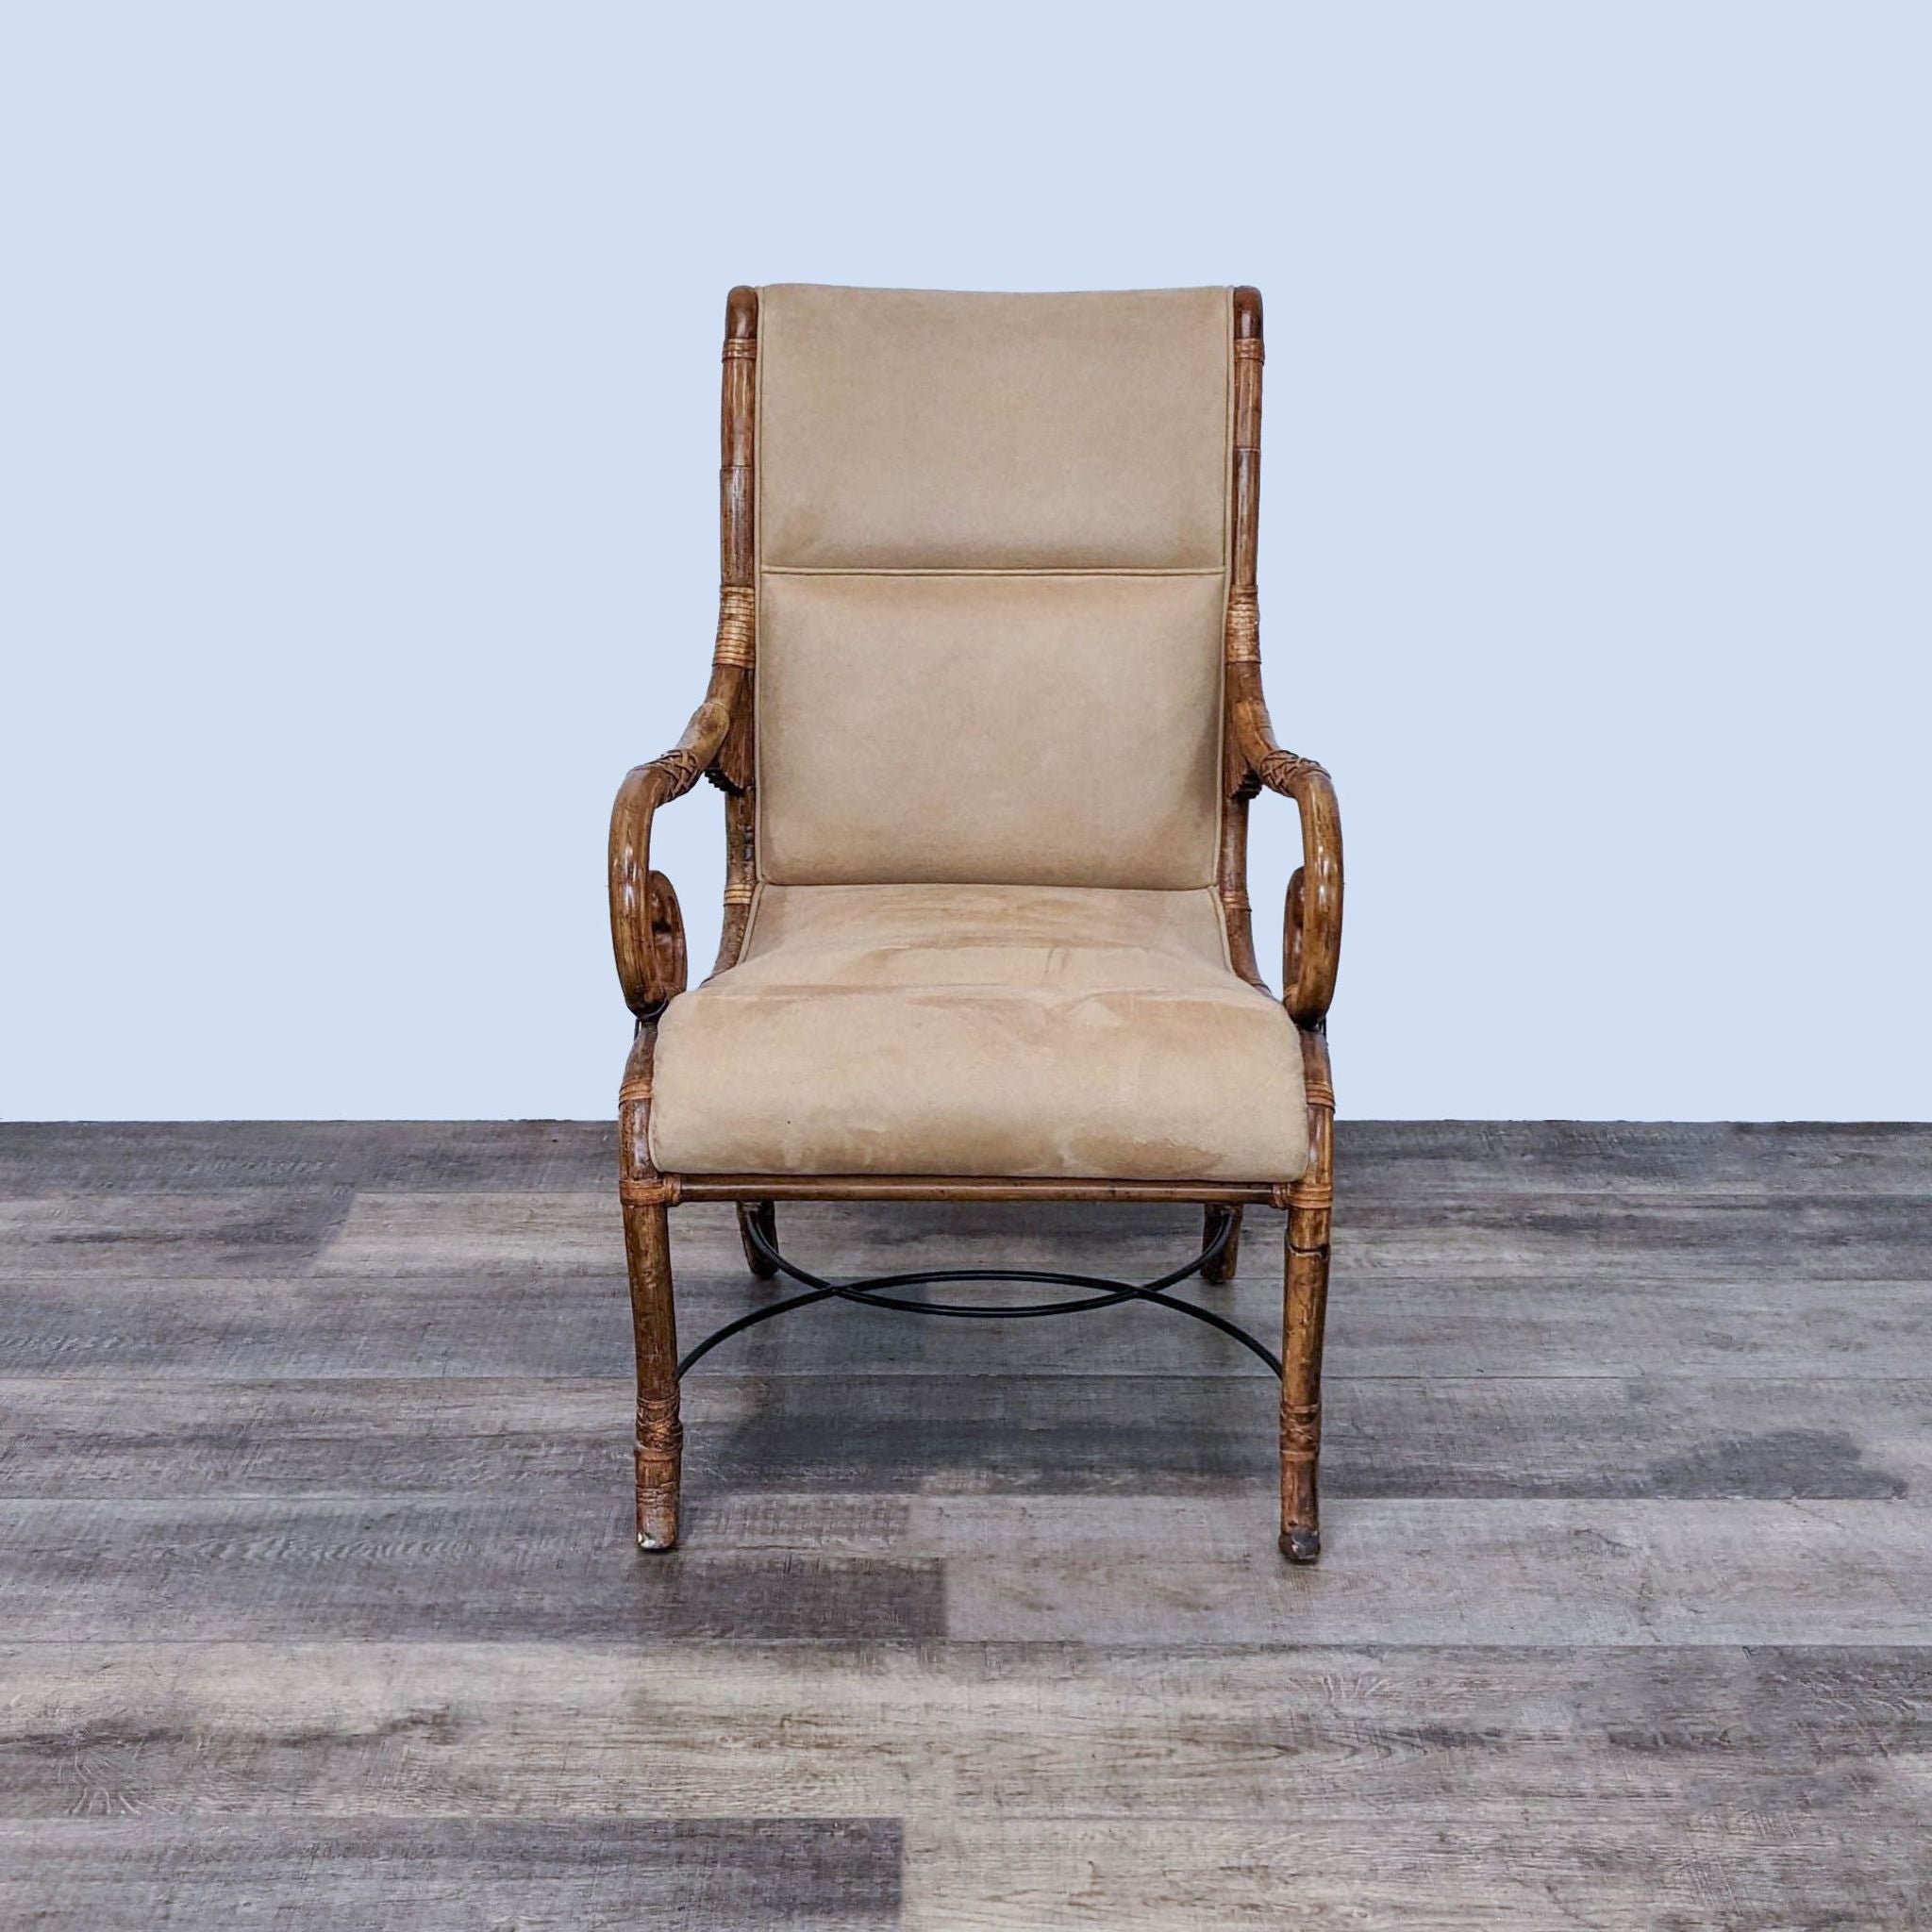 Reperch contemporary bamboo-framed armchair with rattan details and cushioned leather seat on wooden floor.